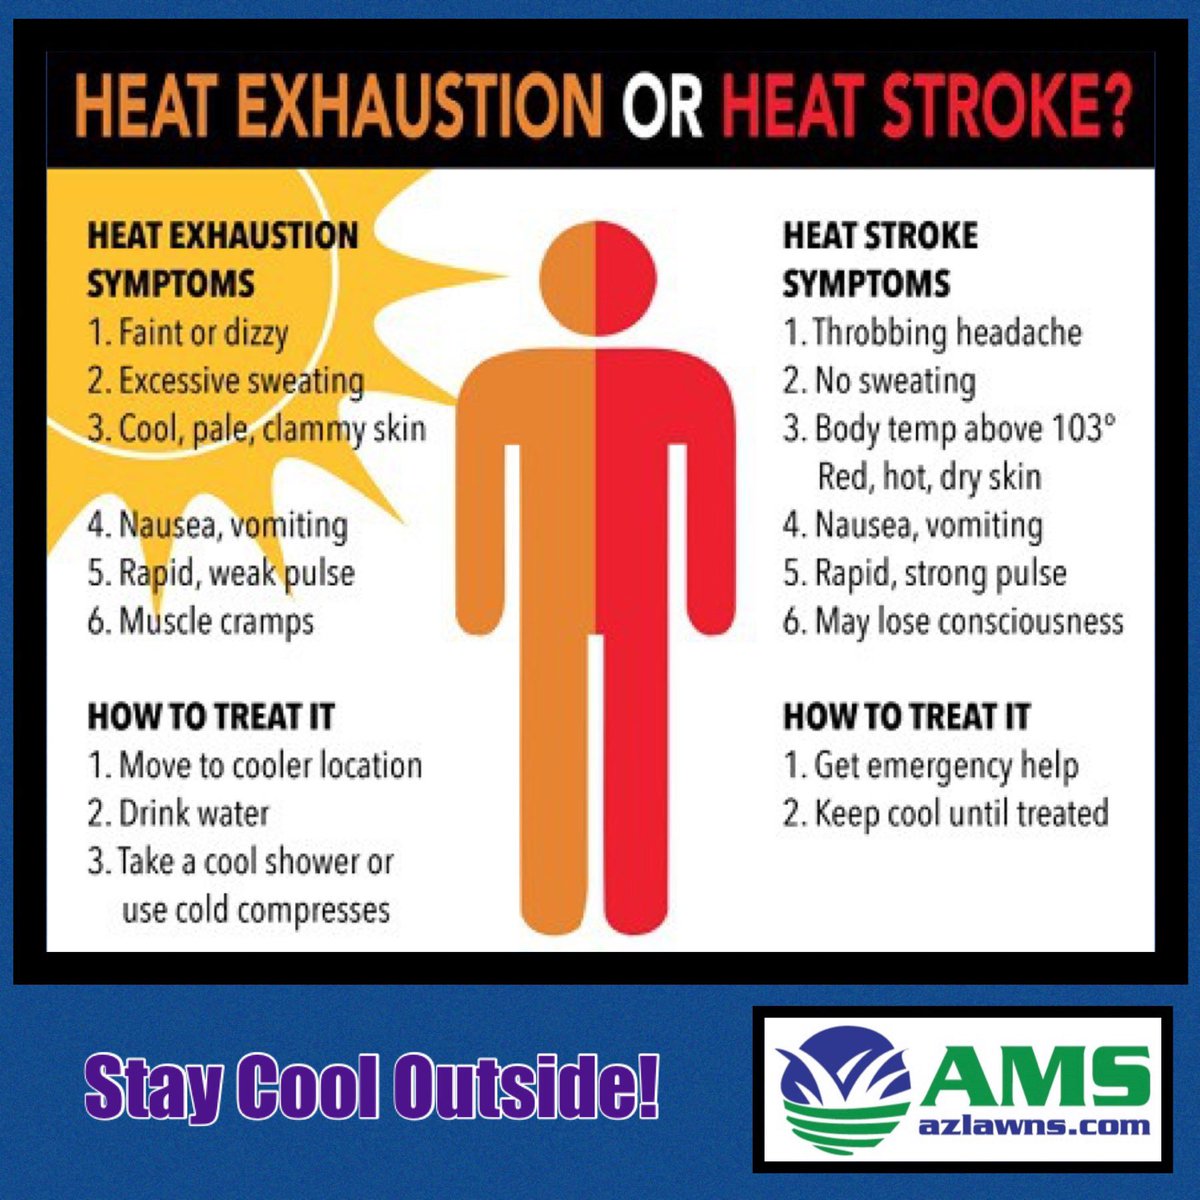 Stay cool outside!  Here are symptoms of heat stroke or heat exhaustion and how to treat it.

#heatstroke #heatexhaustion #phoenixsummers #symptoms #treatment #amslandscaping #azlawns